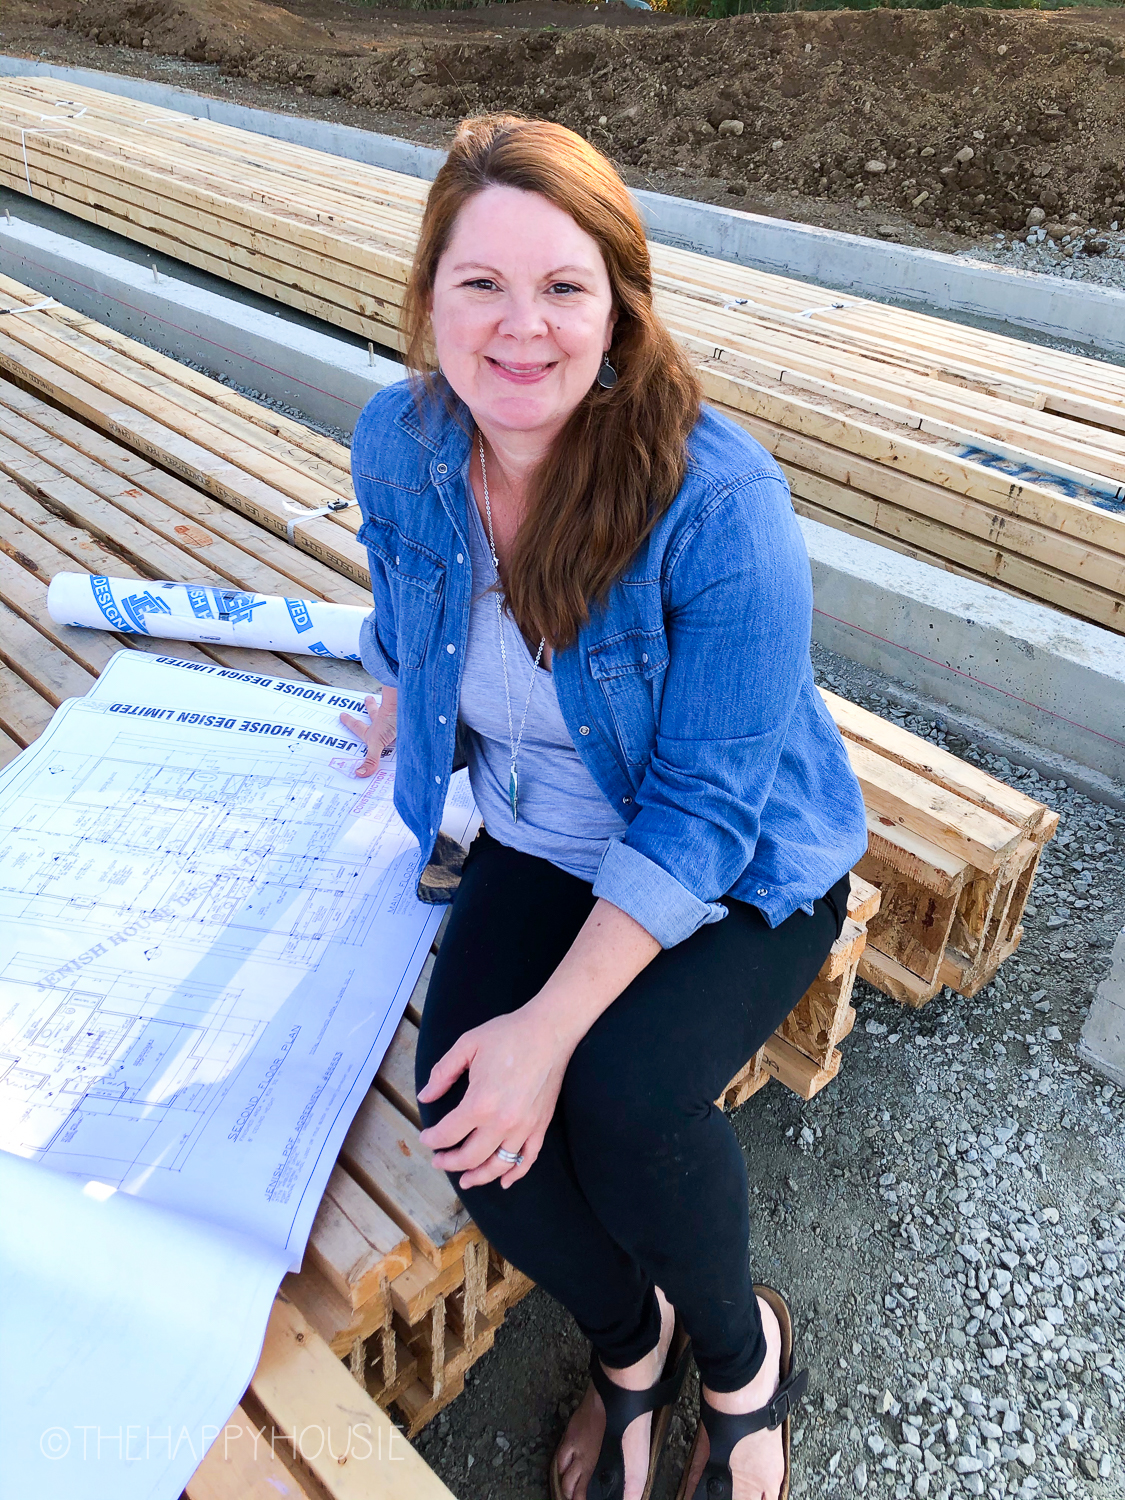 Krista sitting on a pile of wood with house plans laid out in front of her.